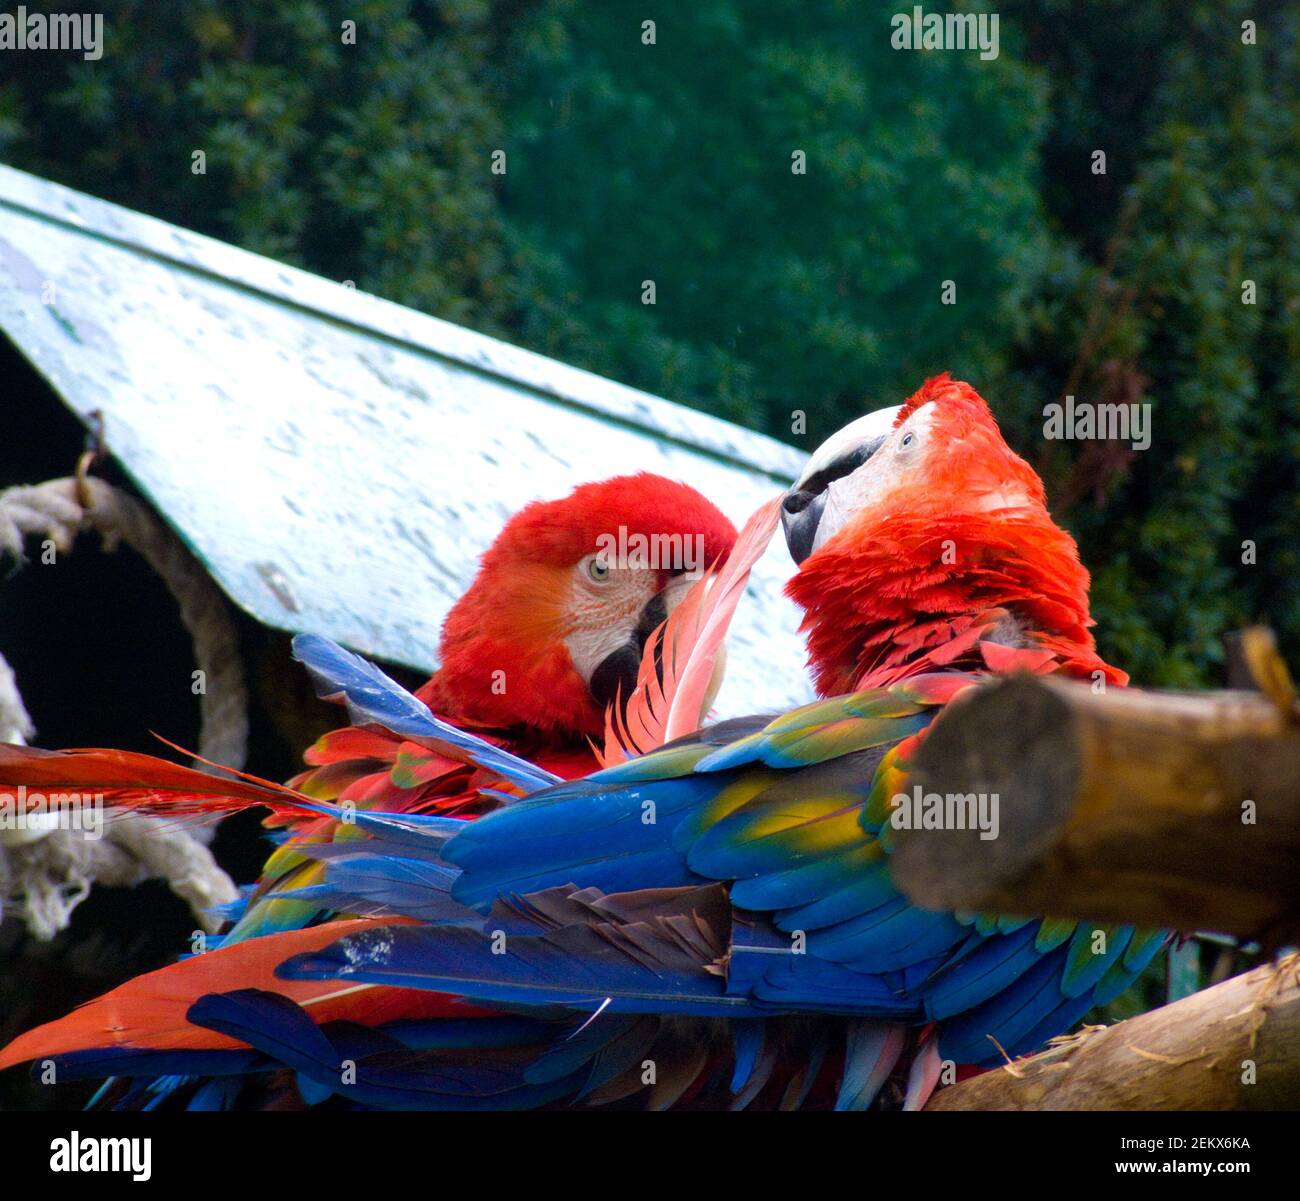 2 macaws, new world parrots, preening, red head, blue tail, blue wings, birds, avian, colorful, colourful Stock Photo